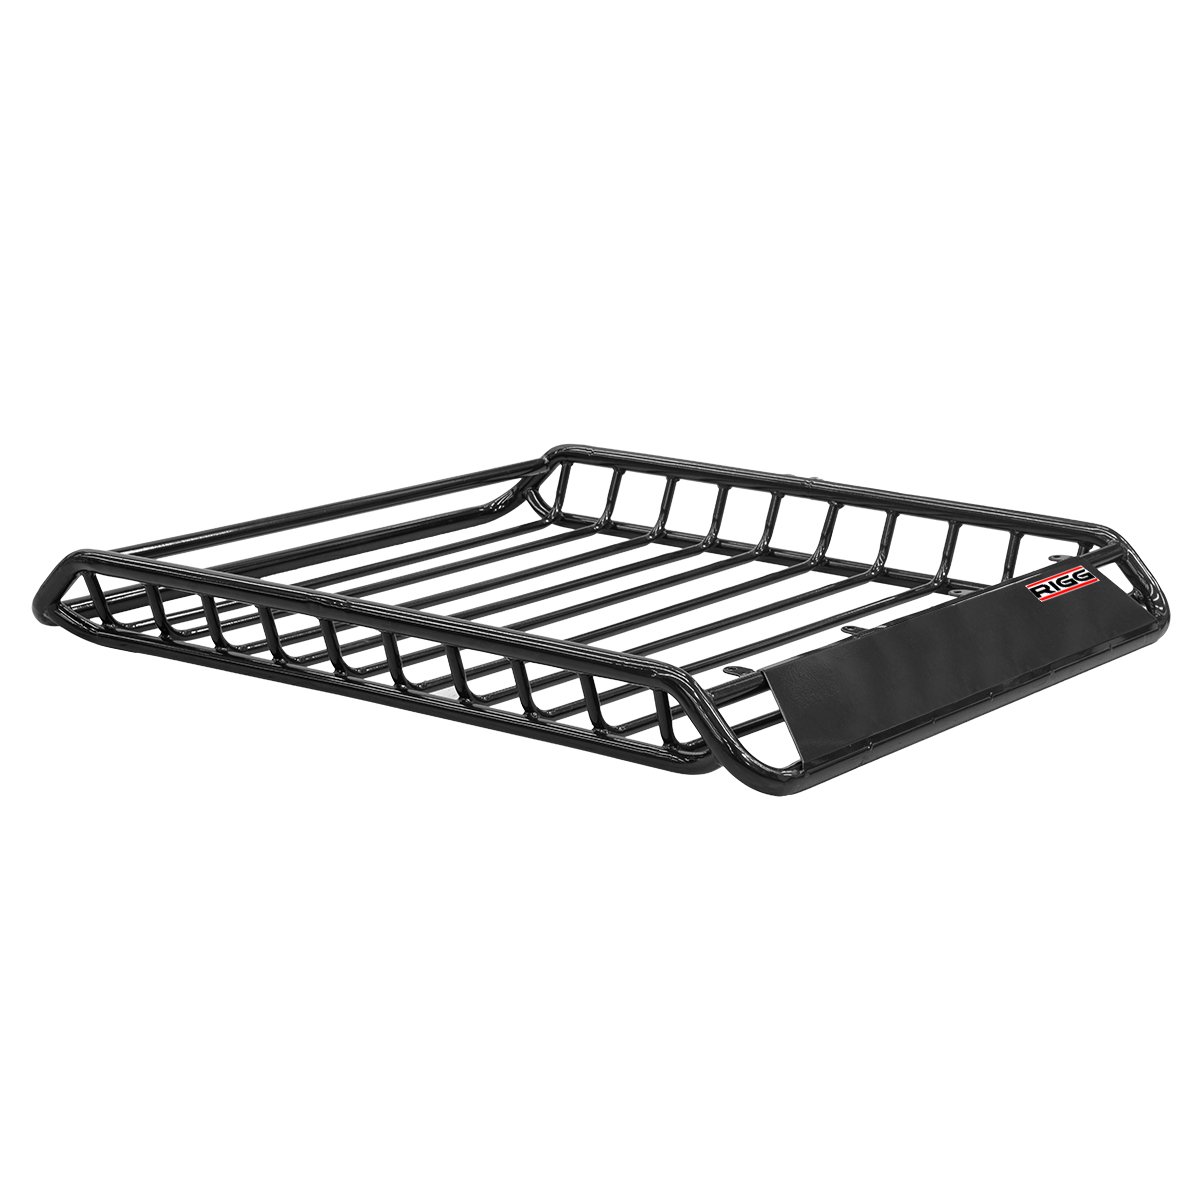 RIGG Universal Car Roof Rack Cage Cargo Carrier 1